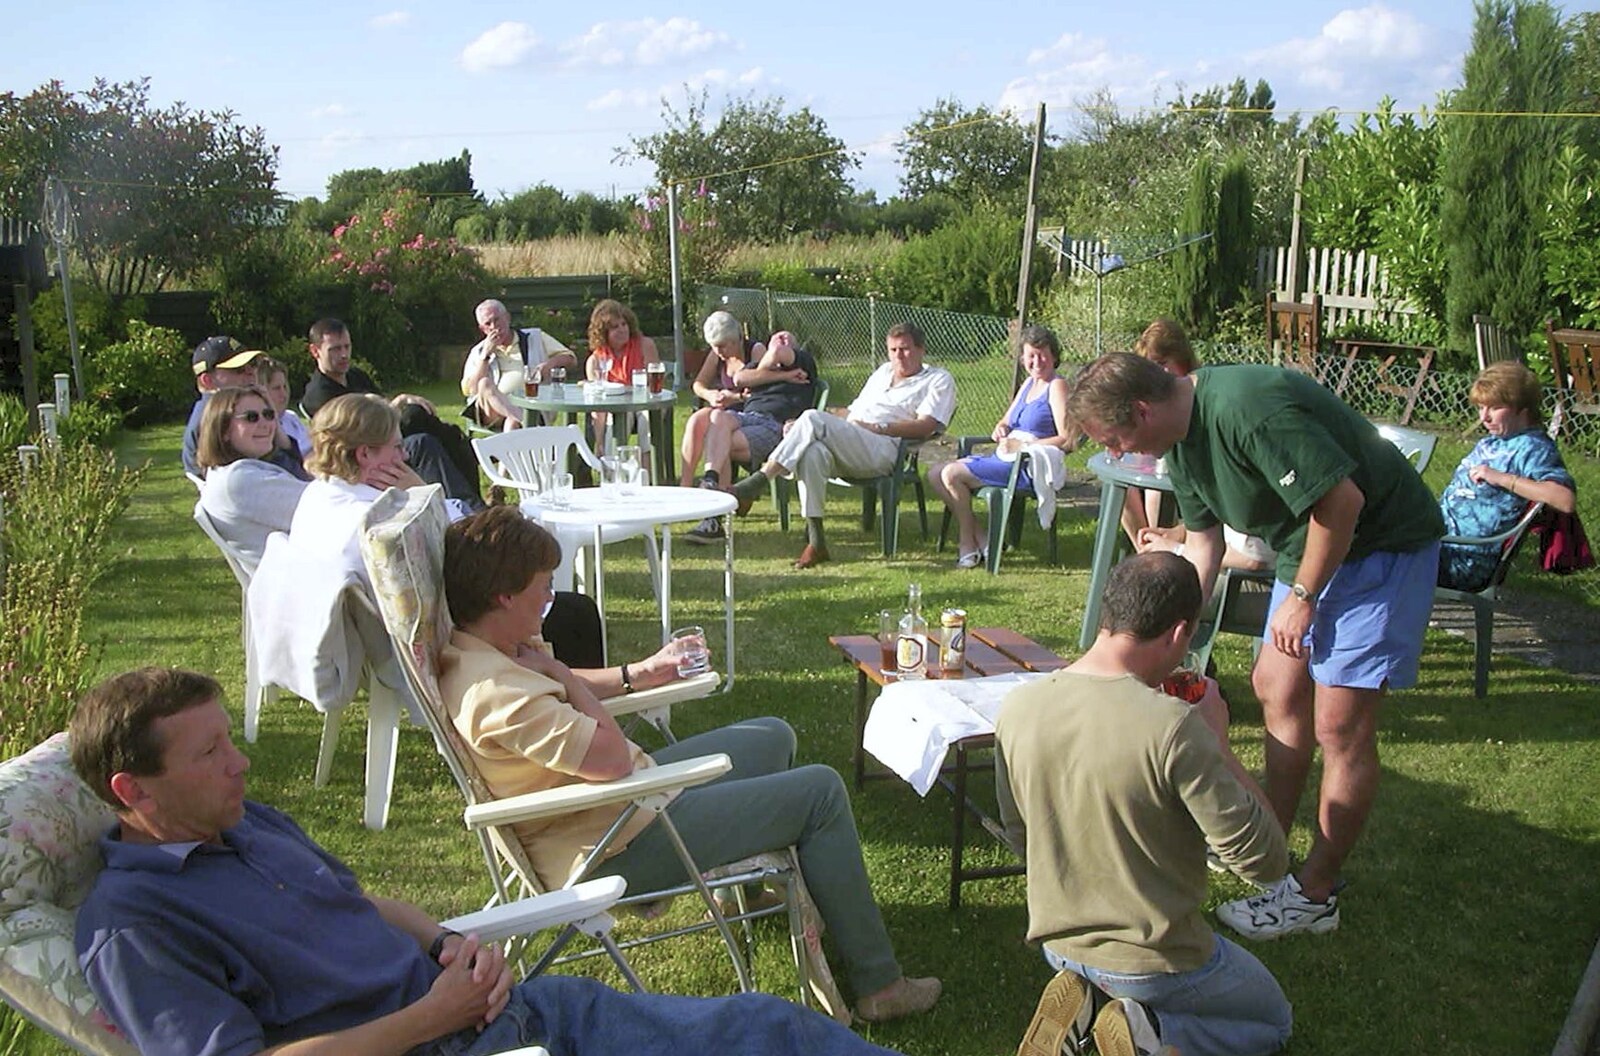 Spammy's back-garden barbeque from A BSCC Barbeque and Bill's 3G Lab Party, Papworth Everard, Cambridgeshire - 1st June 2001